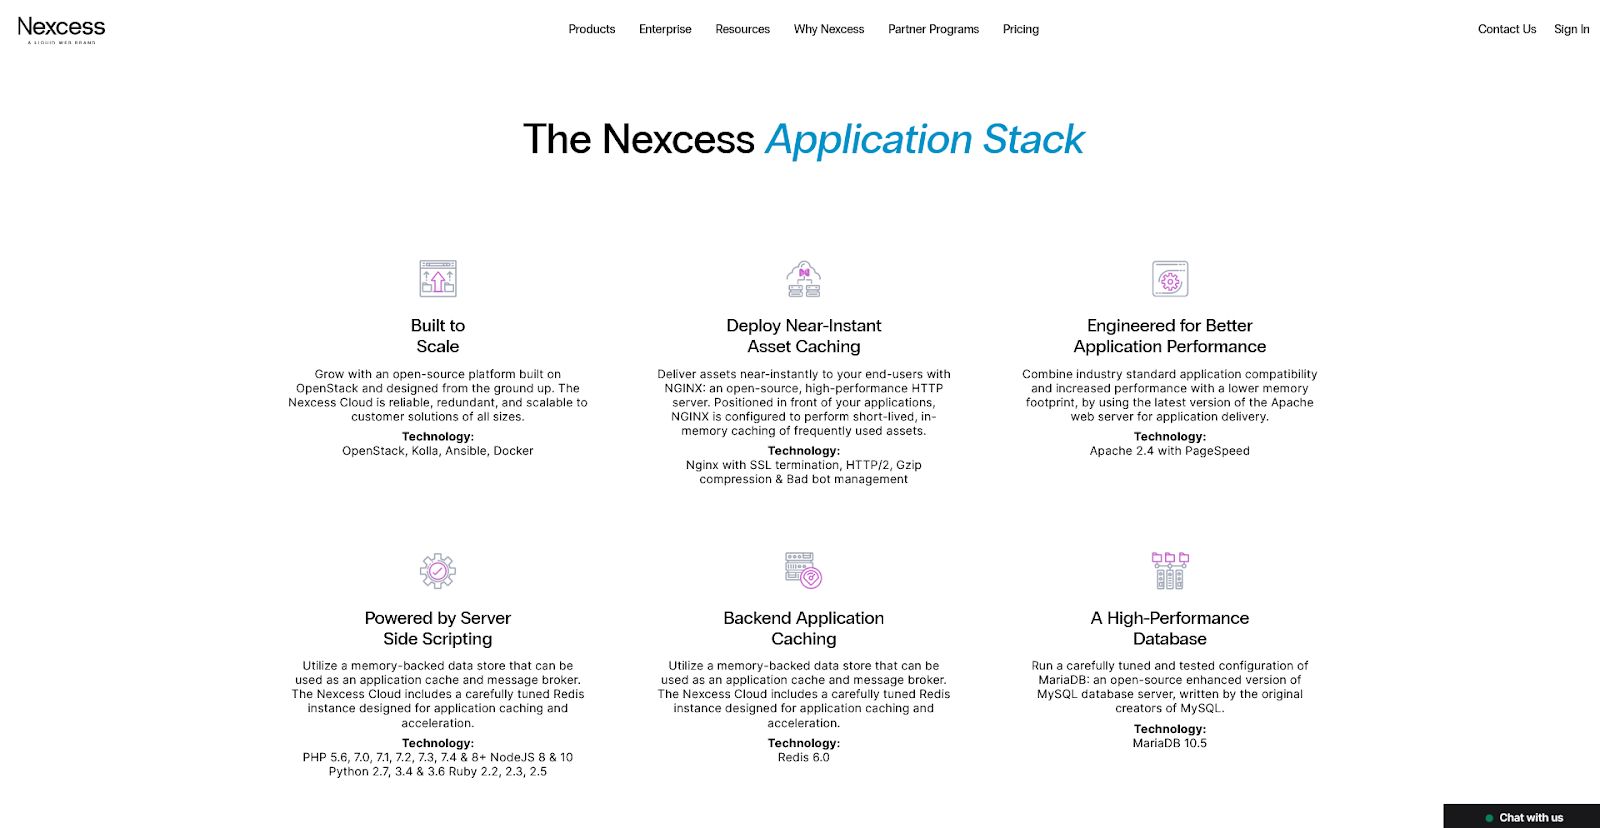 The Nexcess Application Stack.